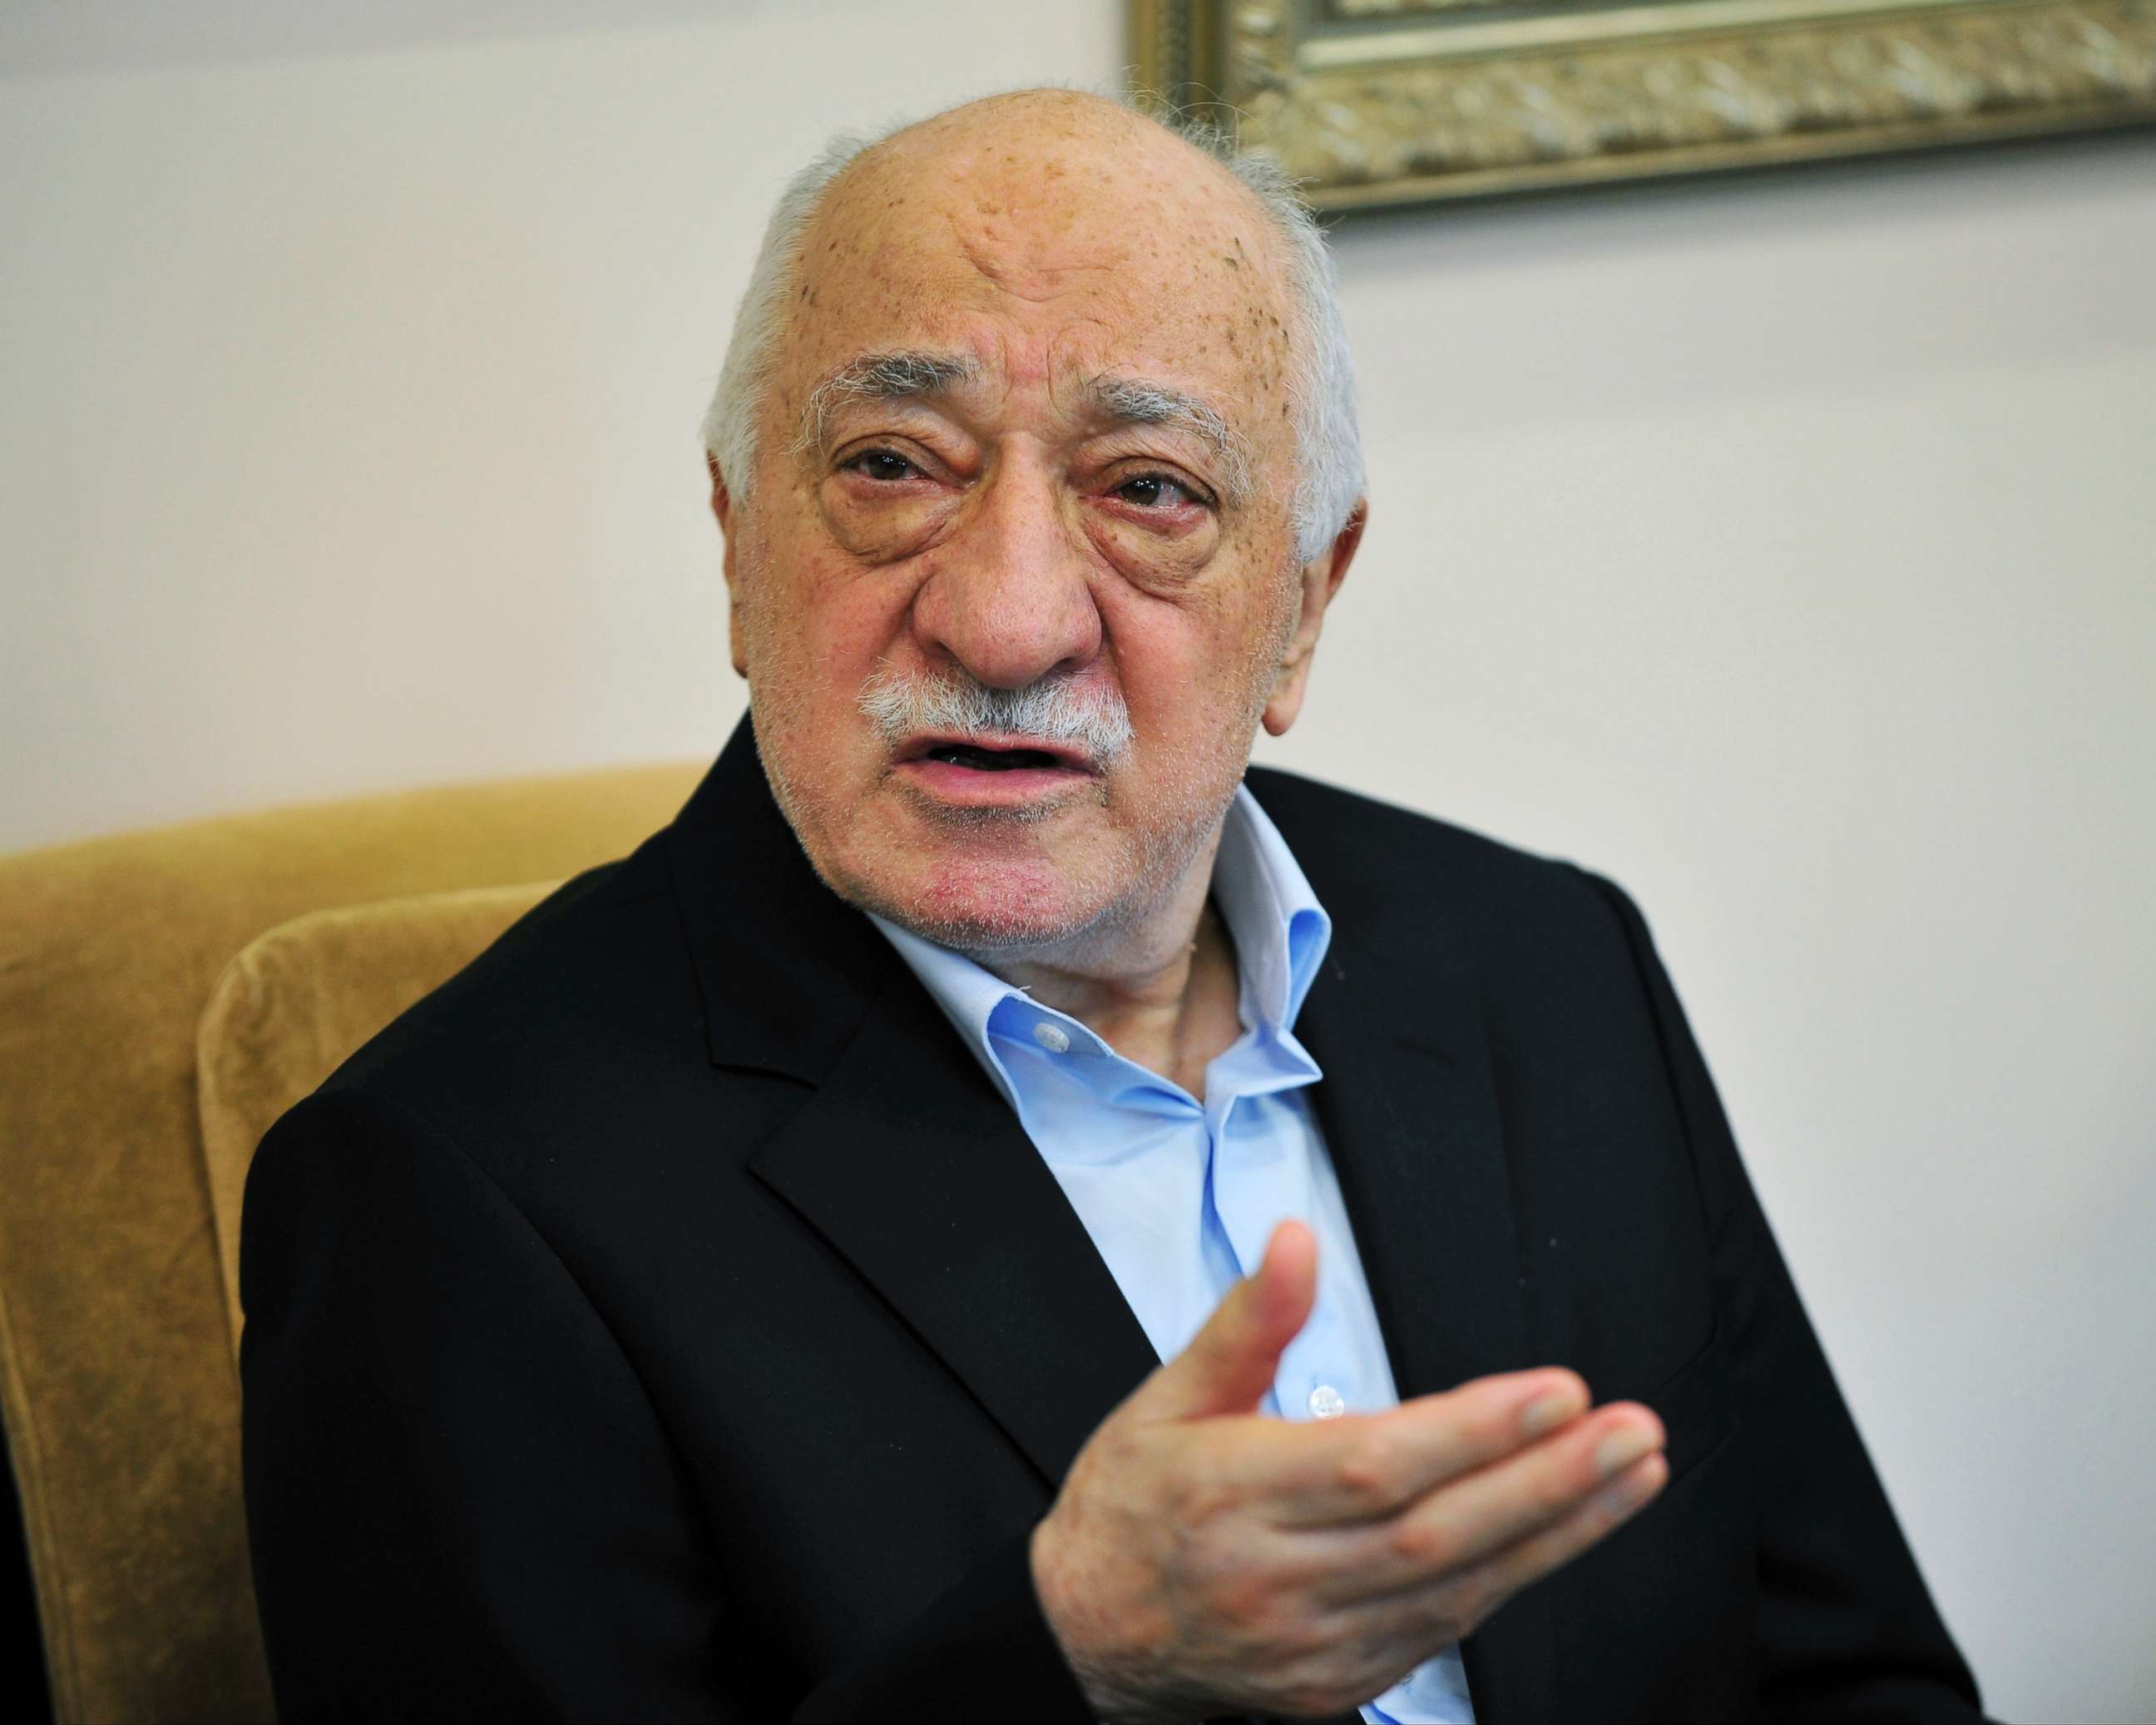 PHOTO: Fethullah Gulen speaks to members of the media at his compound in Saylorsburg, Pa., in this July 17, 2016 file photo.